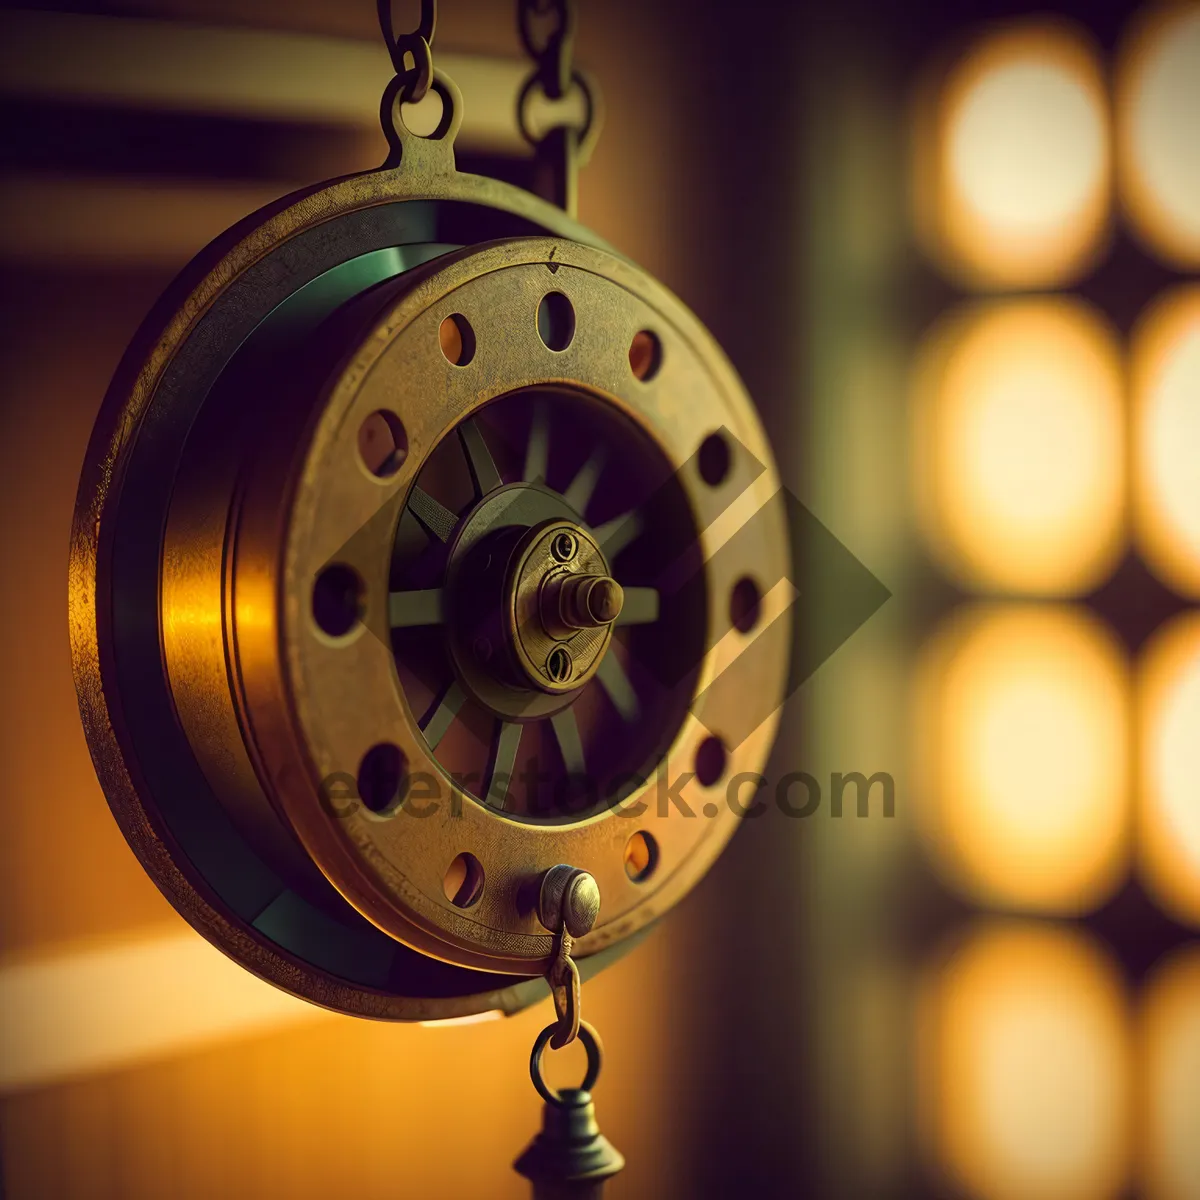 Picture of Mechanical Reel Spotlight: Illuminated Time Machine